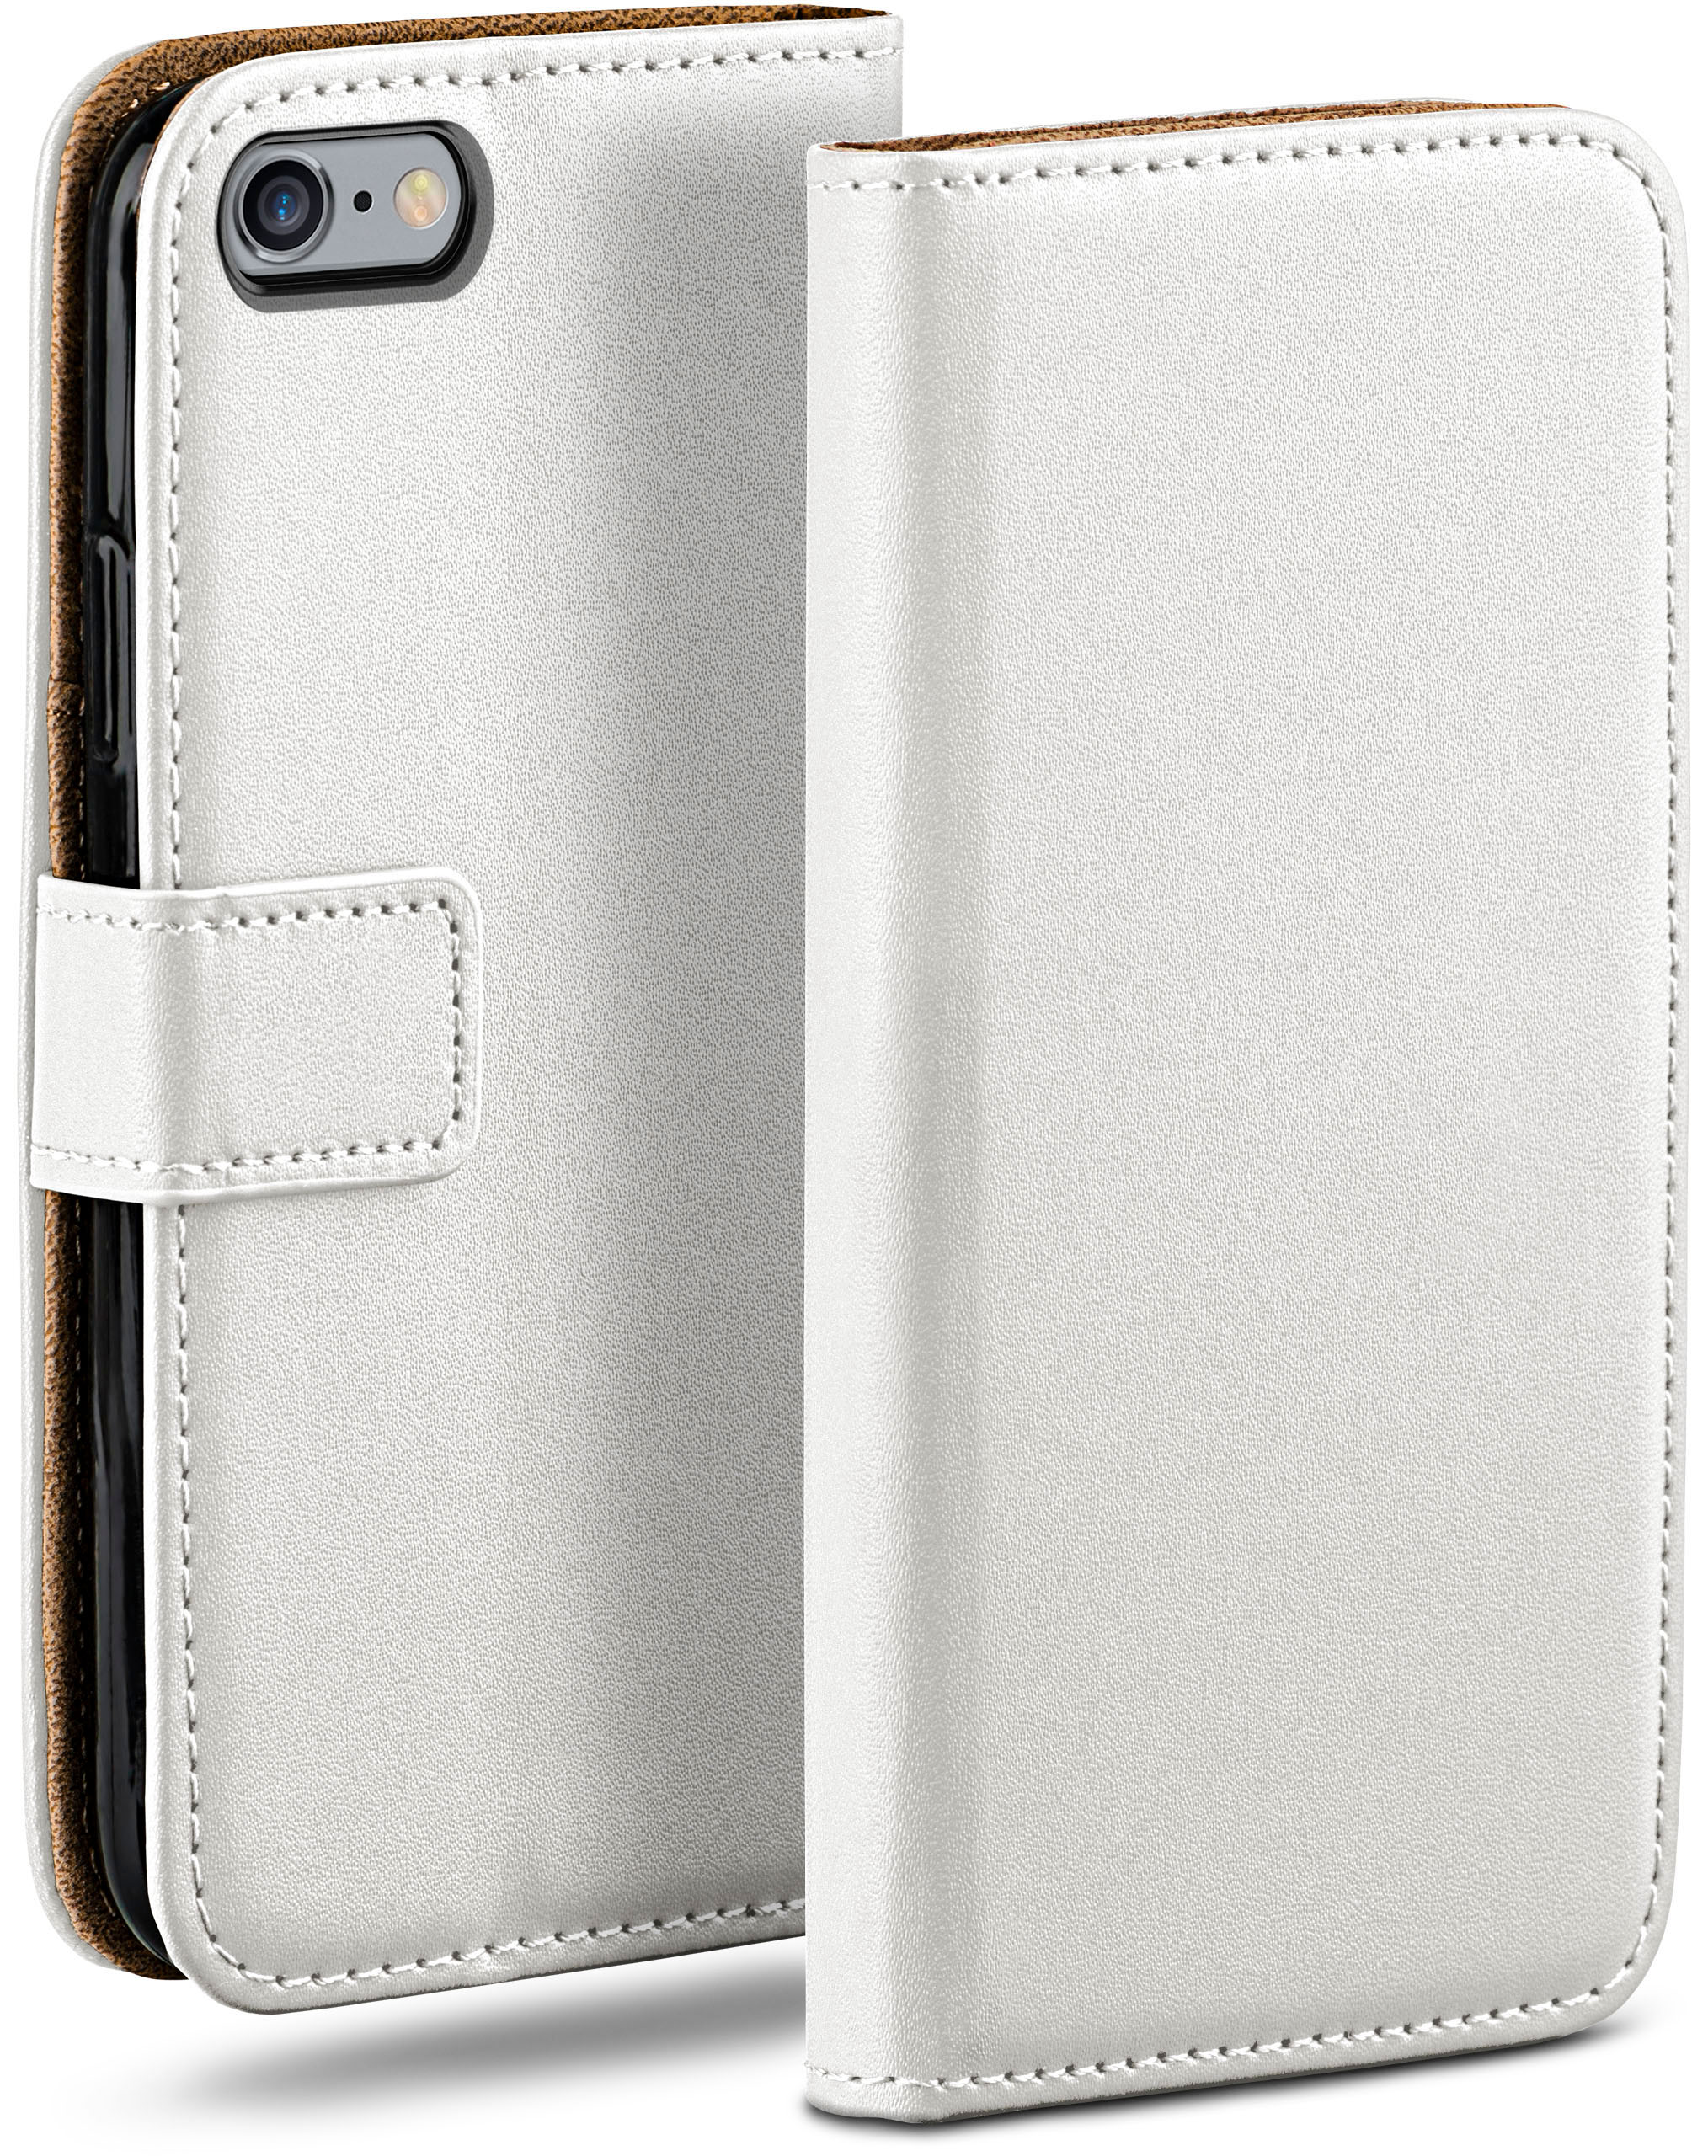 Book / iPhone 6, Pearl-White iPhone 6s Bookcover, MOEX Apple, Case,